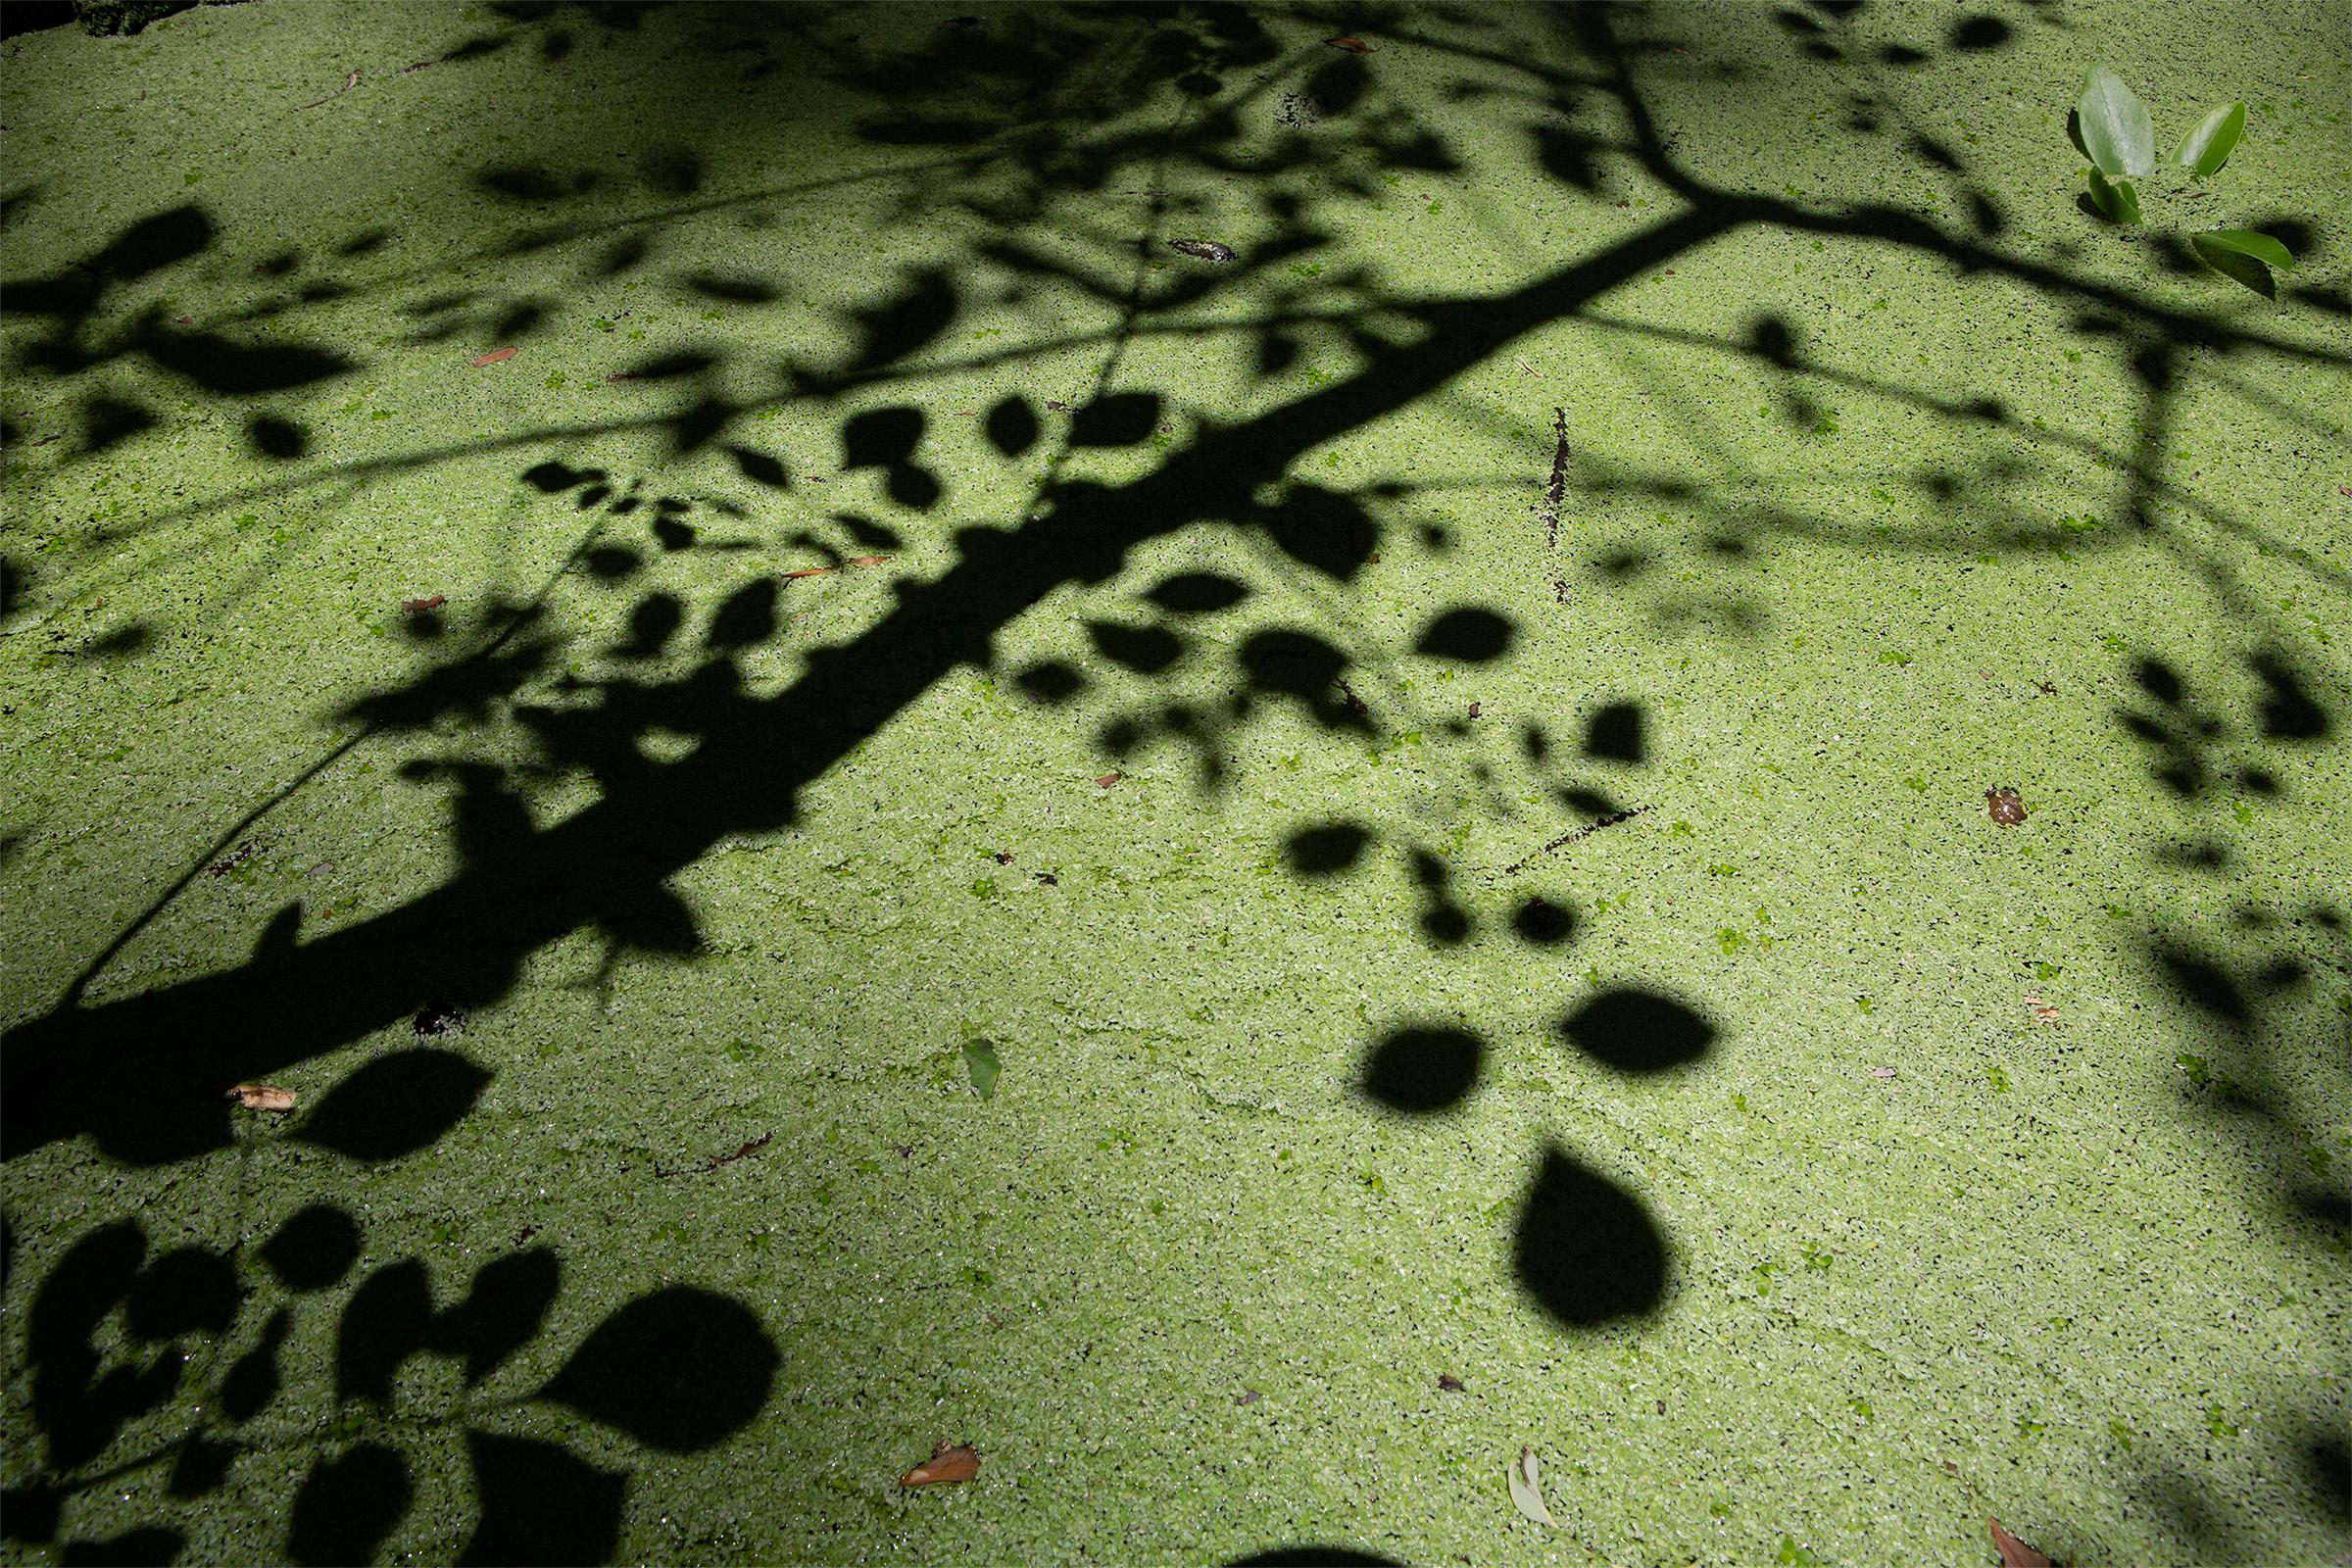 Light Painting - swamp - water - southern photography - cypress - Photograph by Cecilia Montalvo & Charlie McCullers